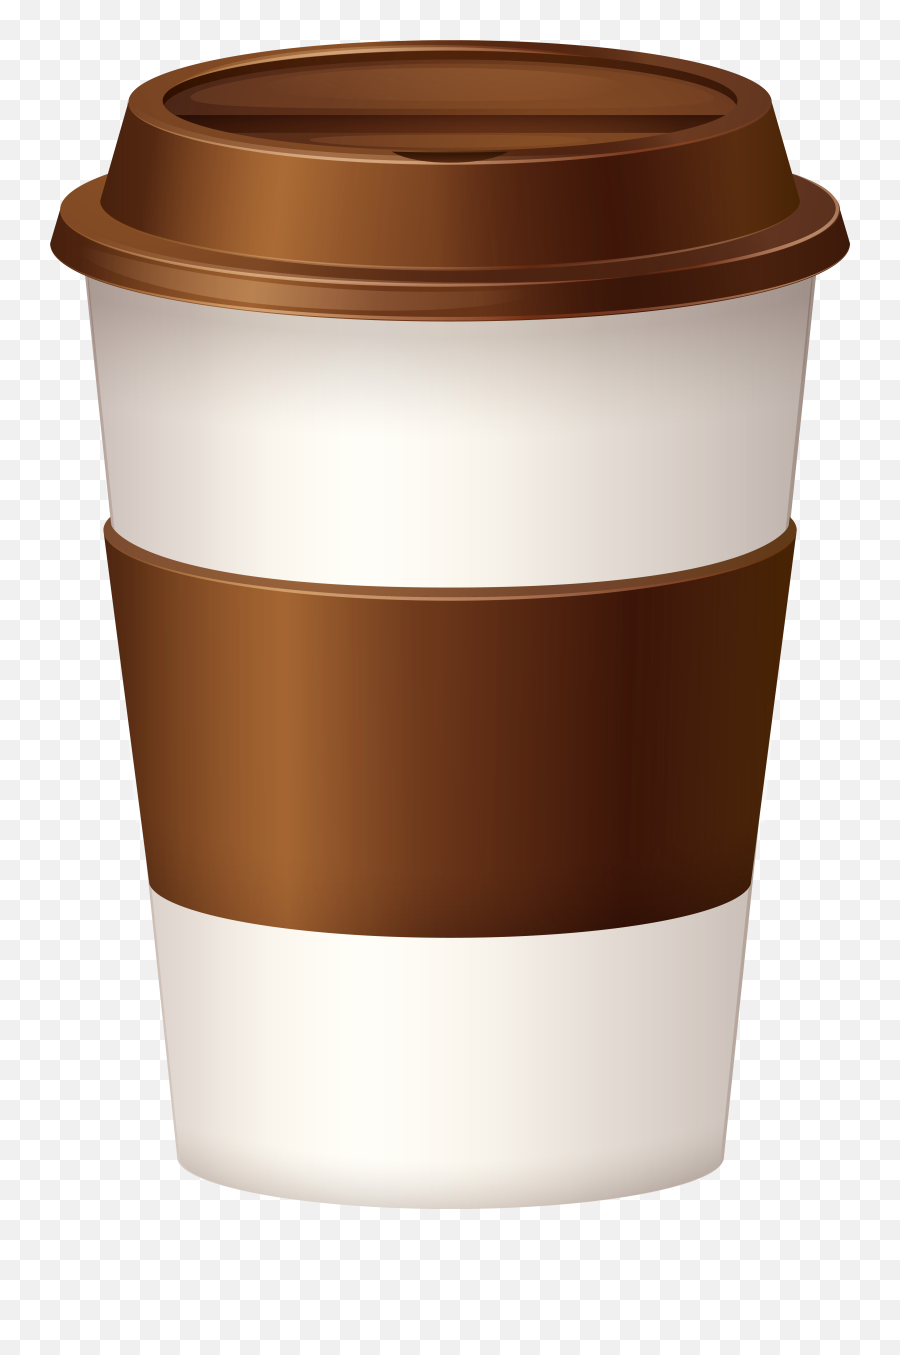 Download Free Png Hot Coffee Cup - Coffee Cup Png Clipart,Coffee Cups Png